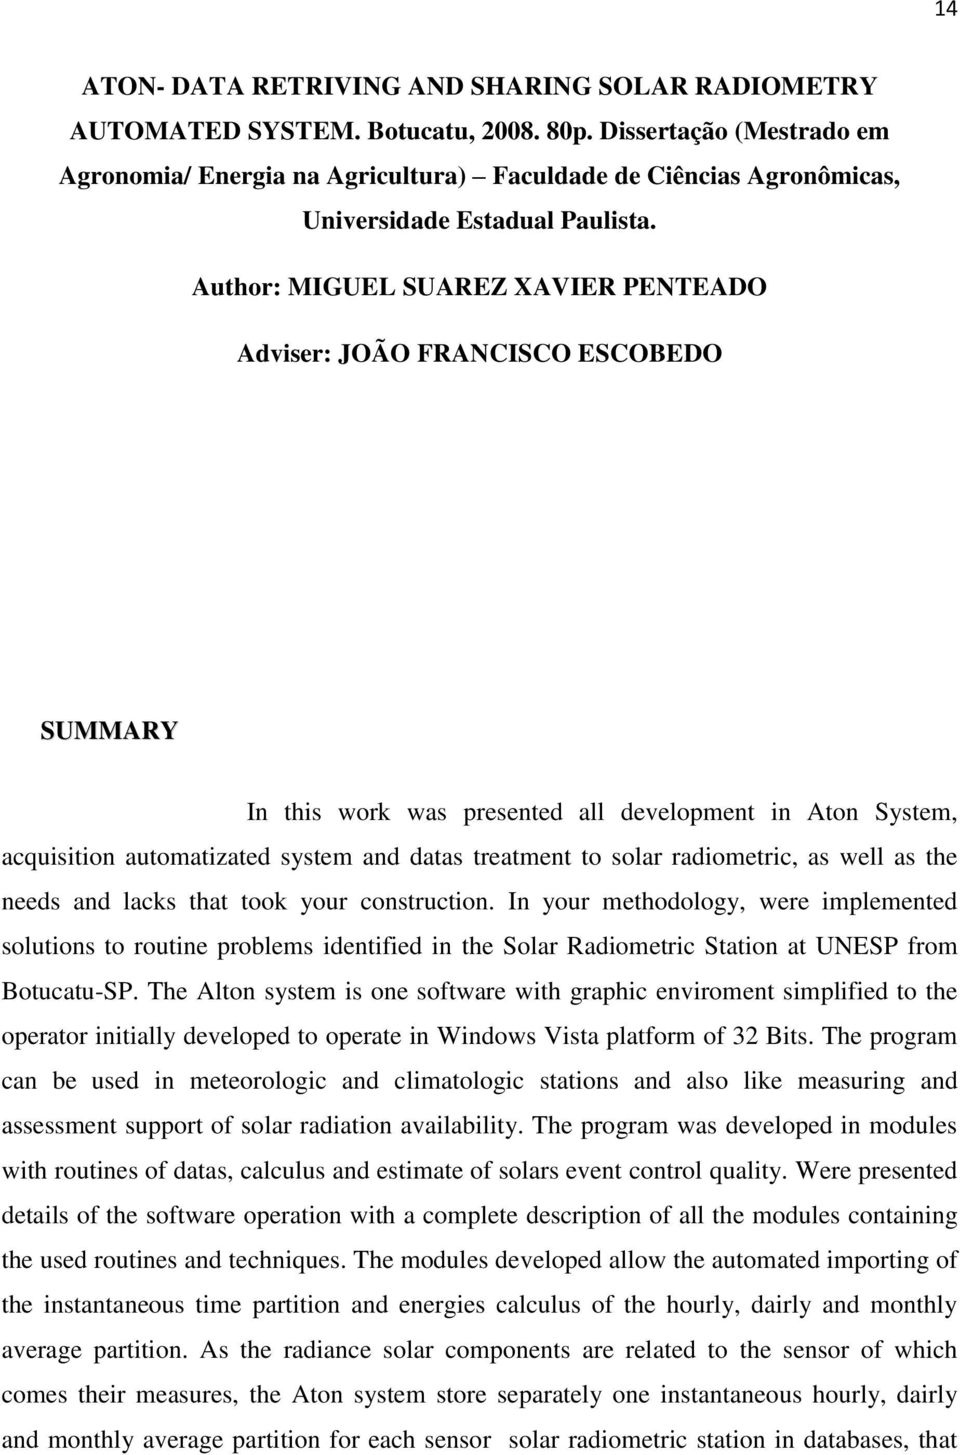 Author: MIGUEL SUAREZ XAVIER PENTEADO Adviser: JOÃO FRANCISCO ESCOBEDO SUMMARY In this work was presented all development in Aton System, acquisition automatizated system and datas treatment to solar